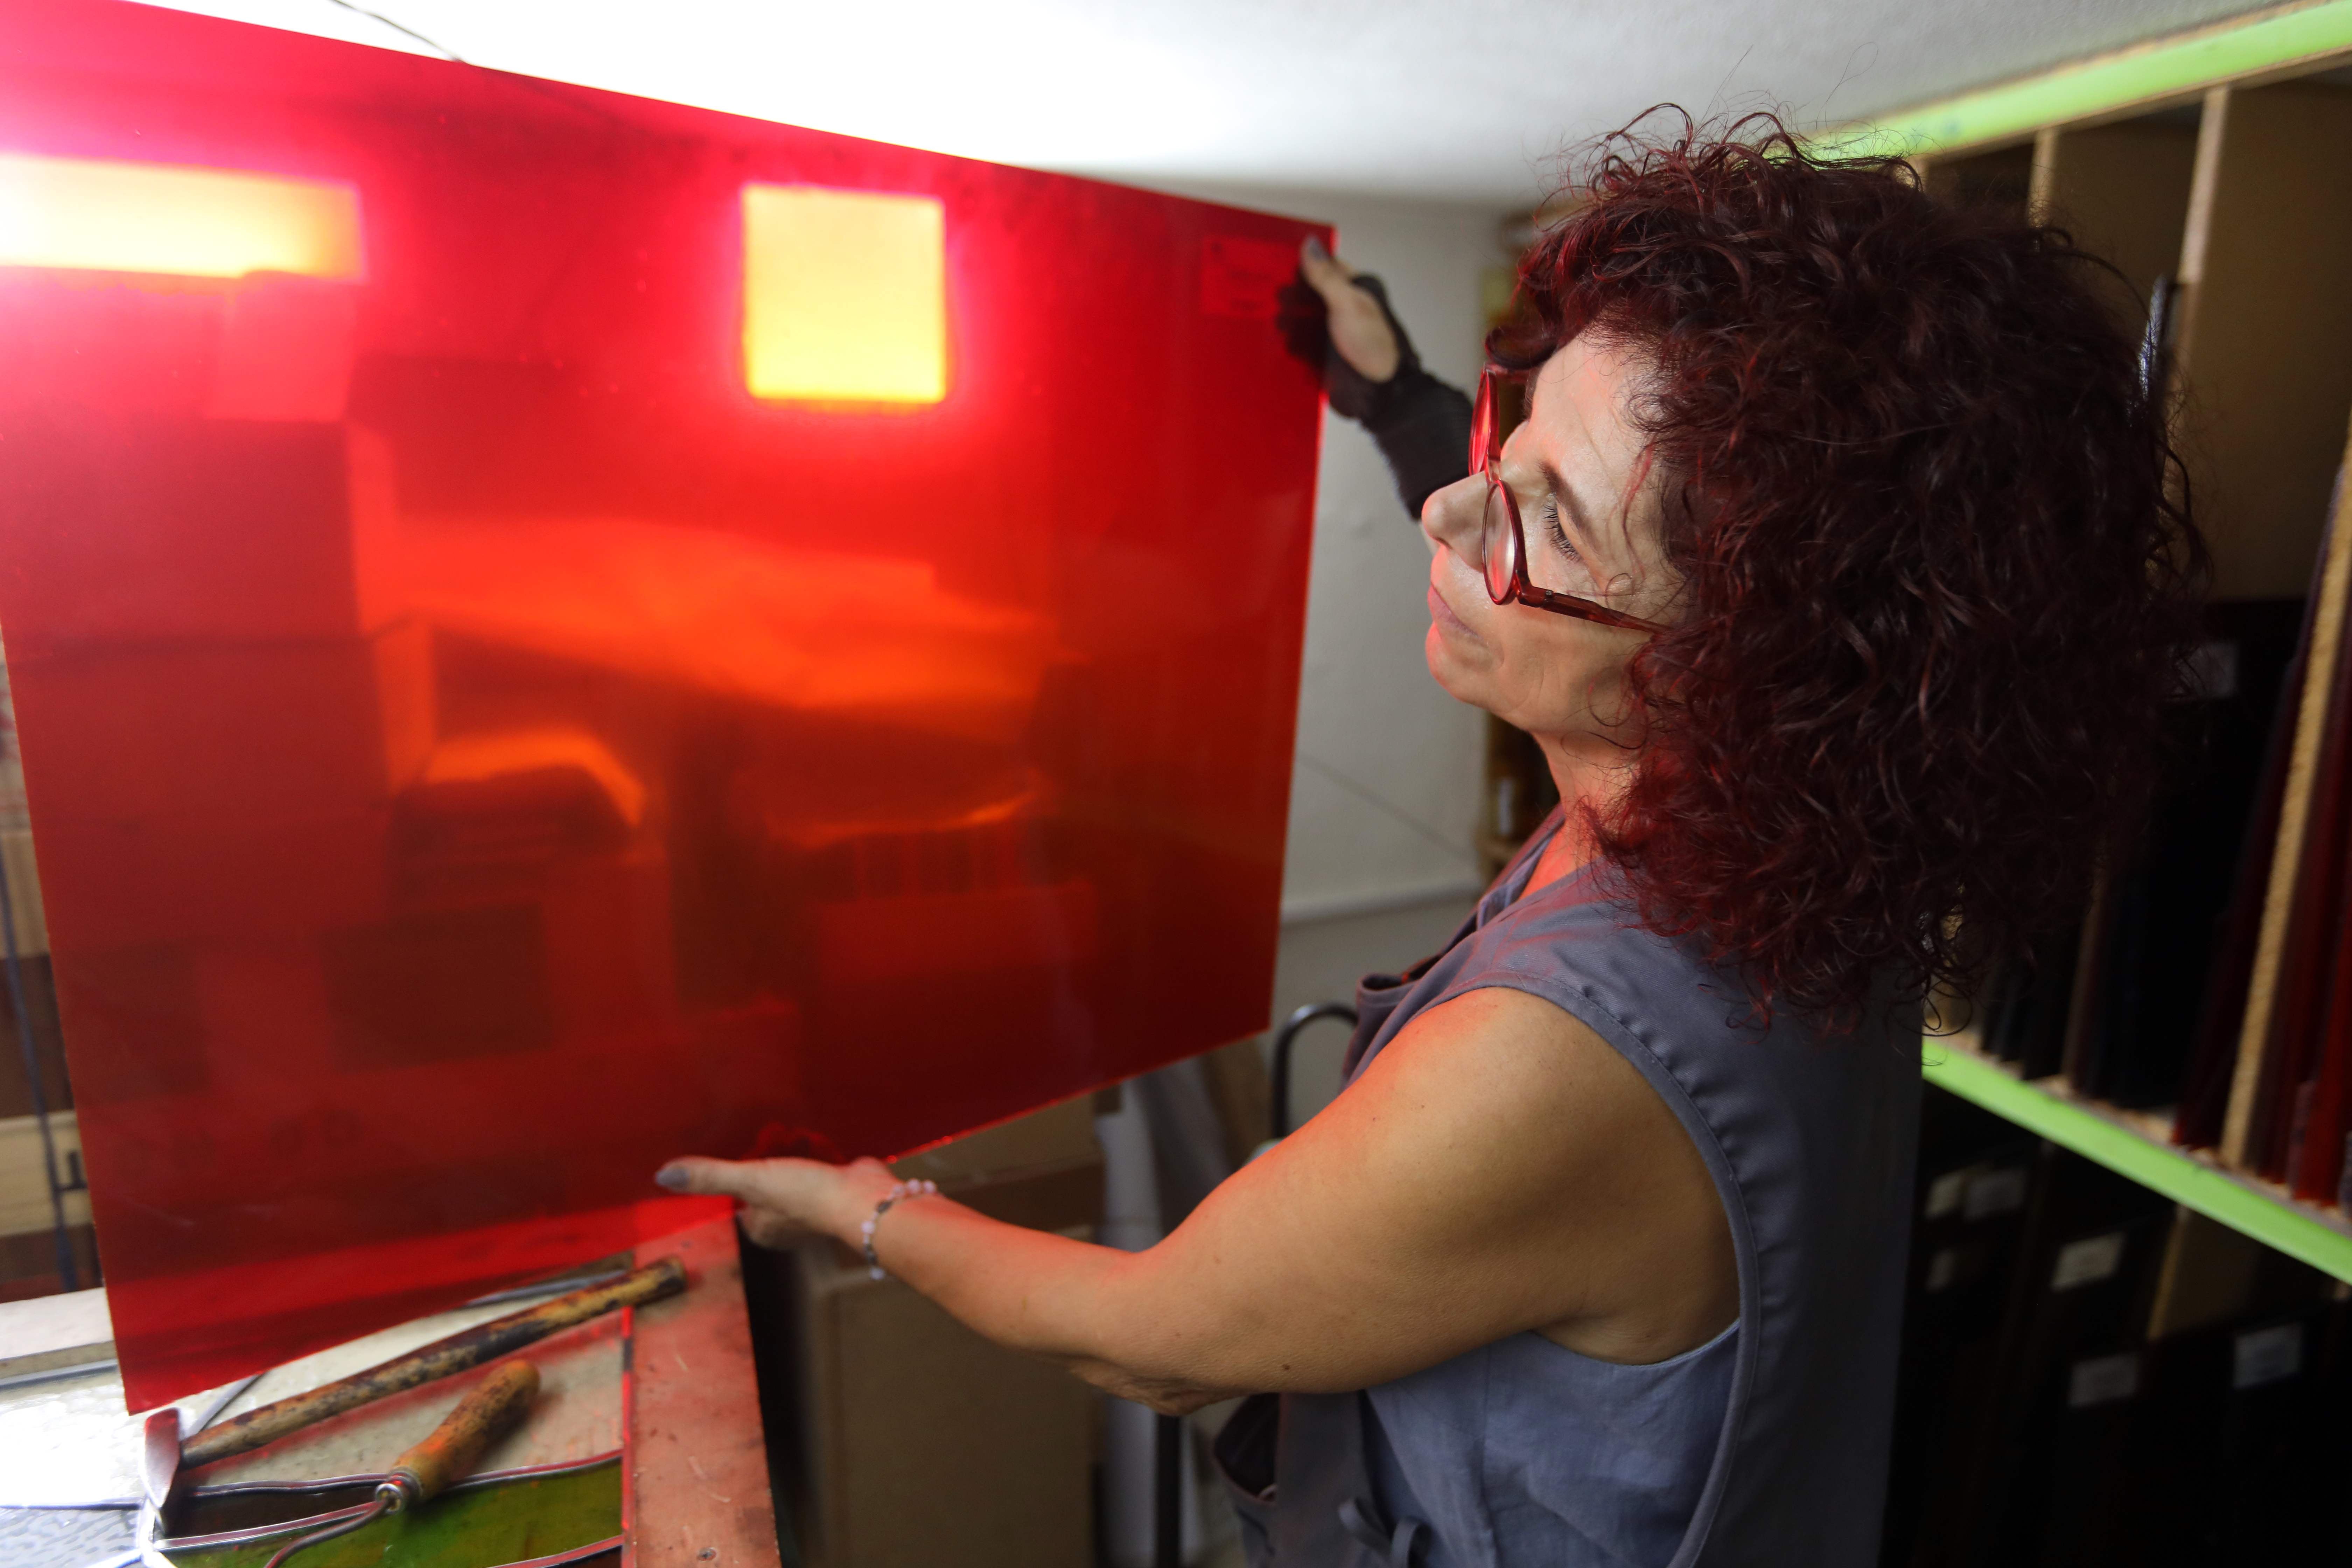 Maya Husseini examines red glass to be used on one of her works in progress